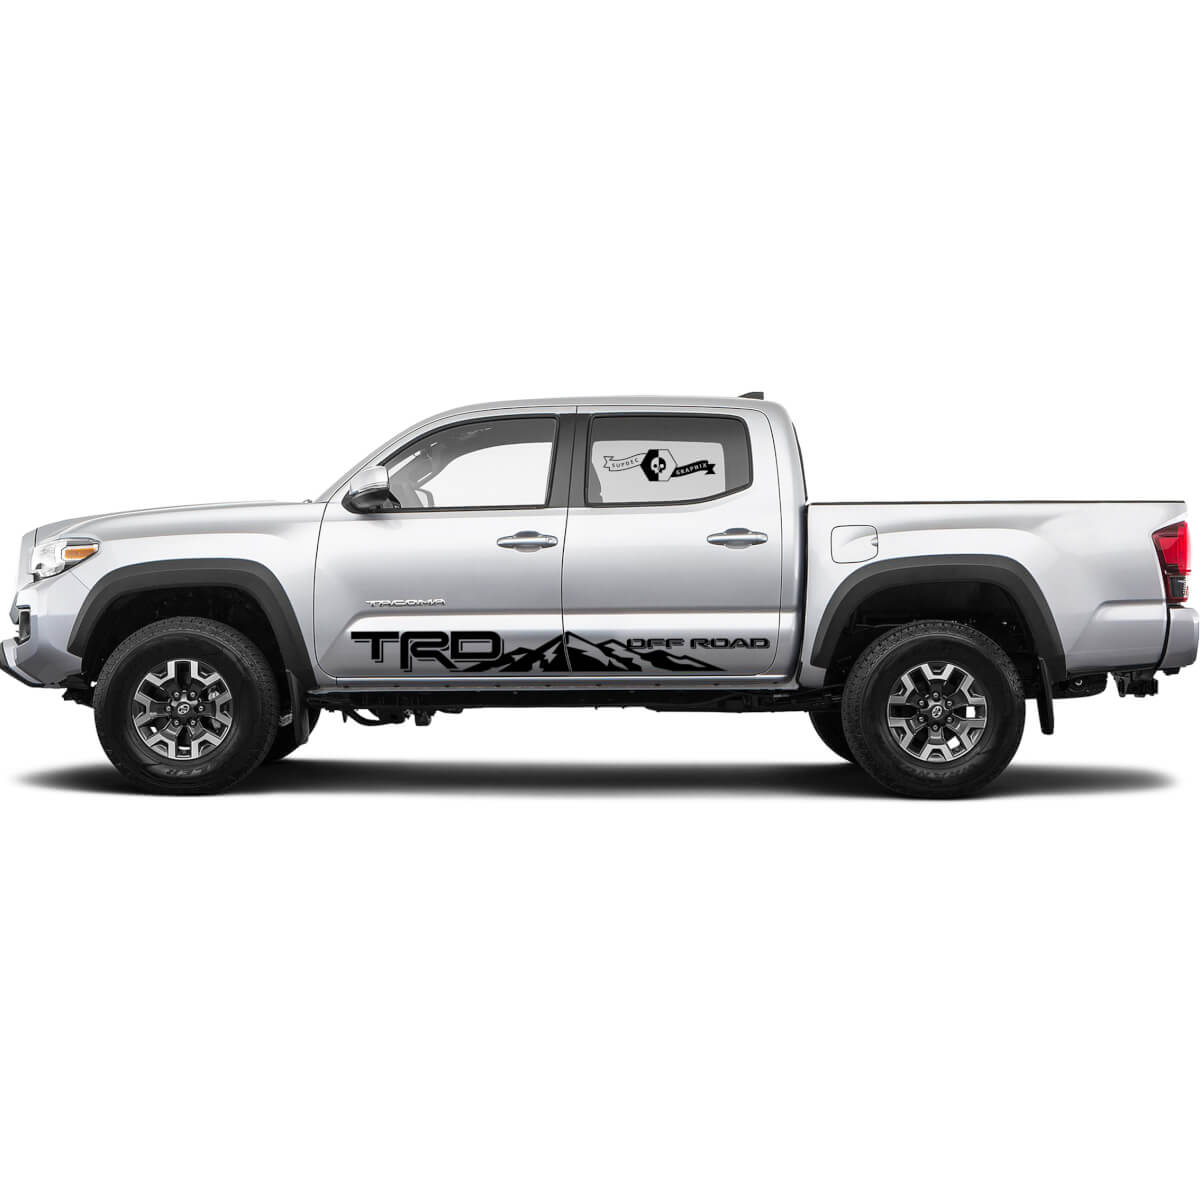 TRD off road Mountains Style for Side Rocker Panel Truck Decals Stickers for Tacoma Tundra Hilux 4Runner